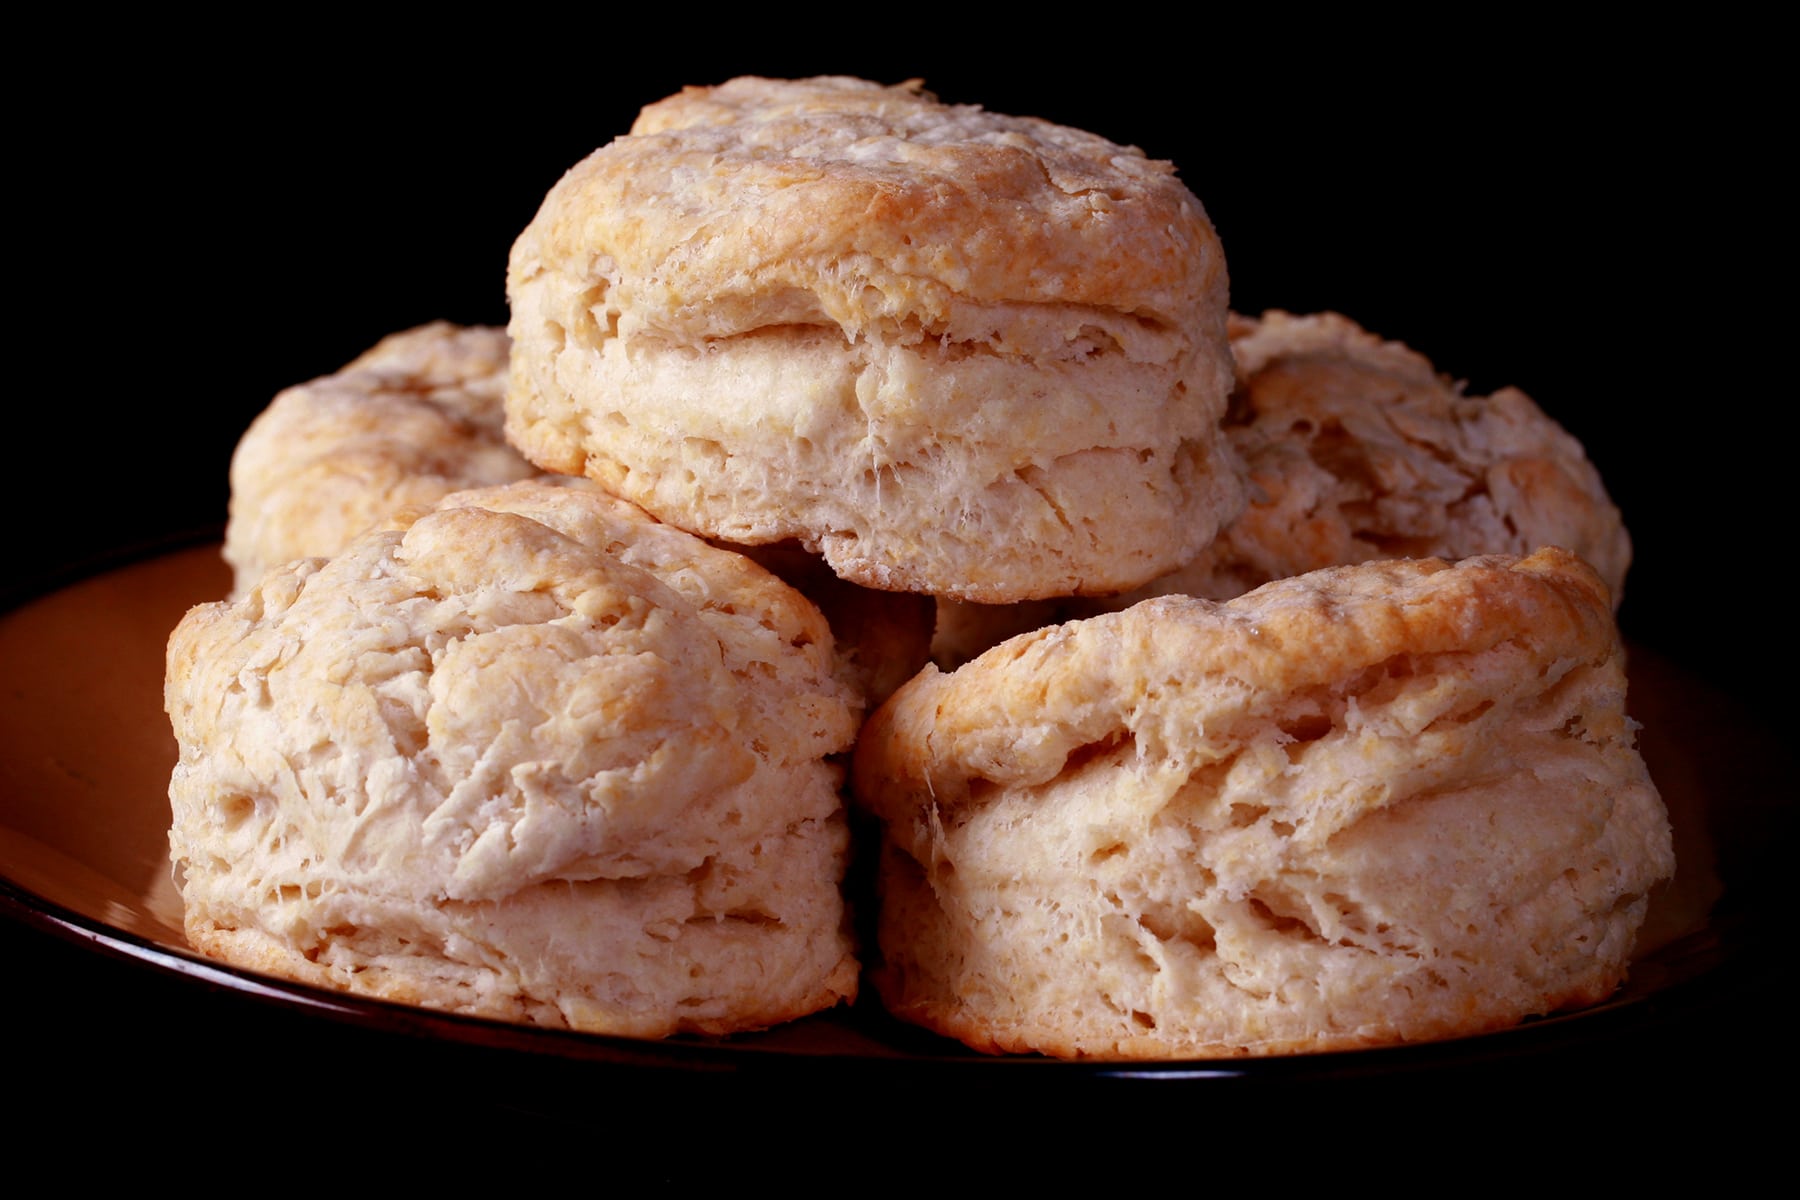 A plate of homemade baking powder biscuits.